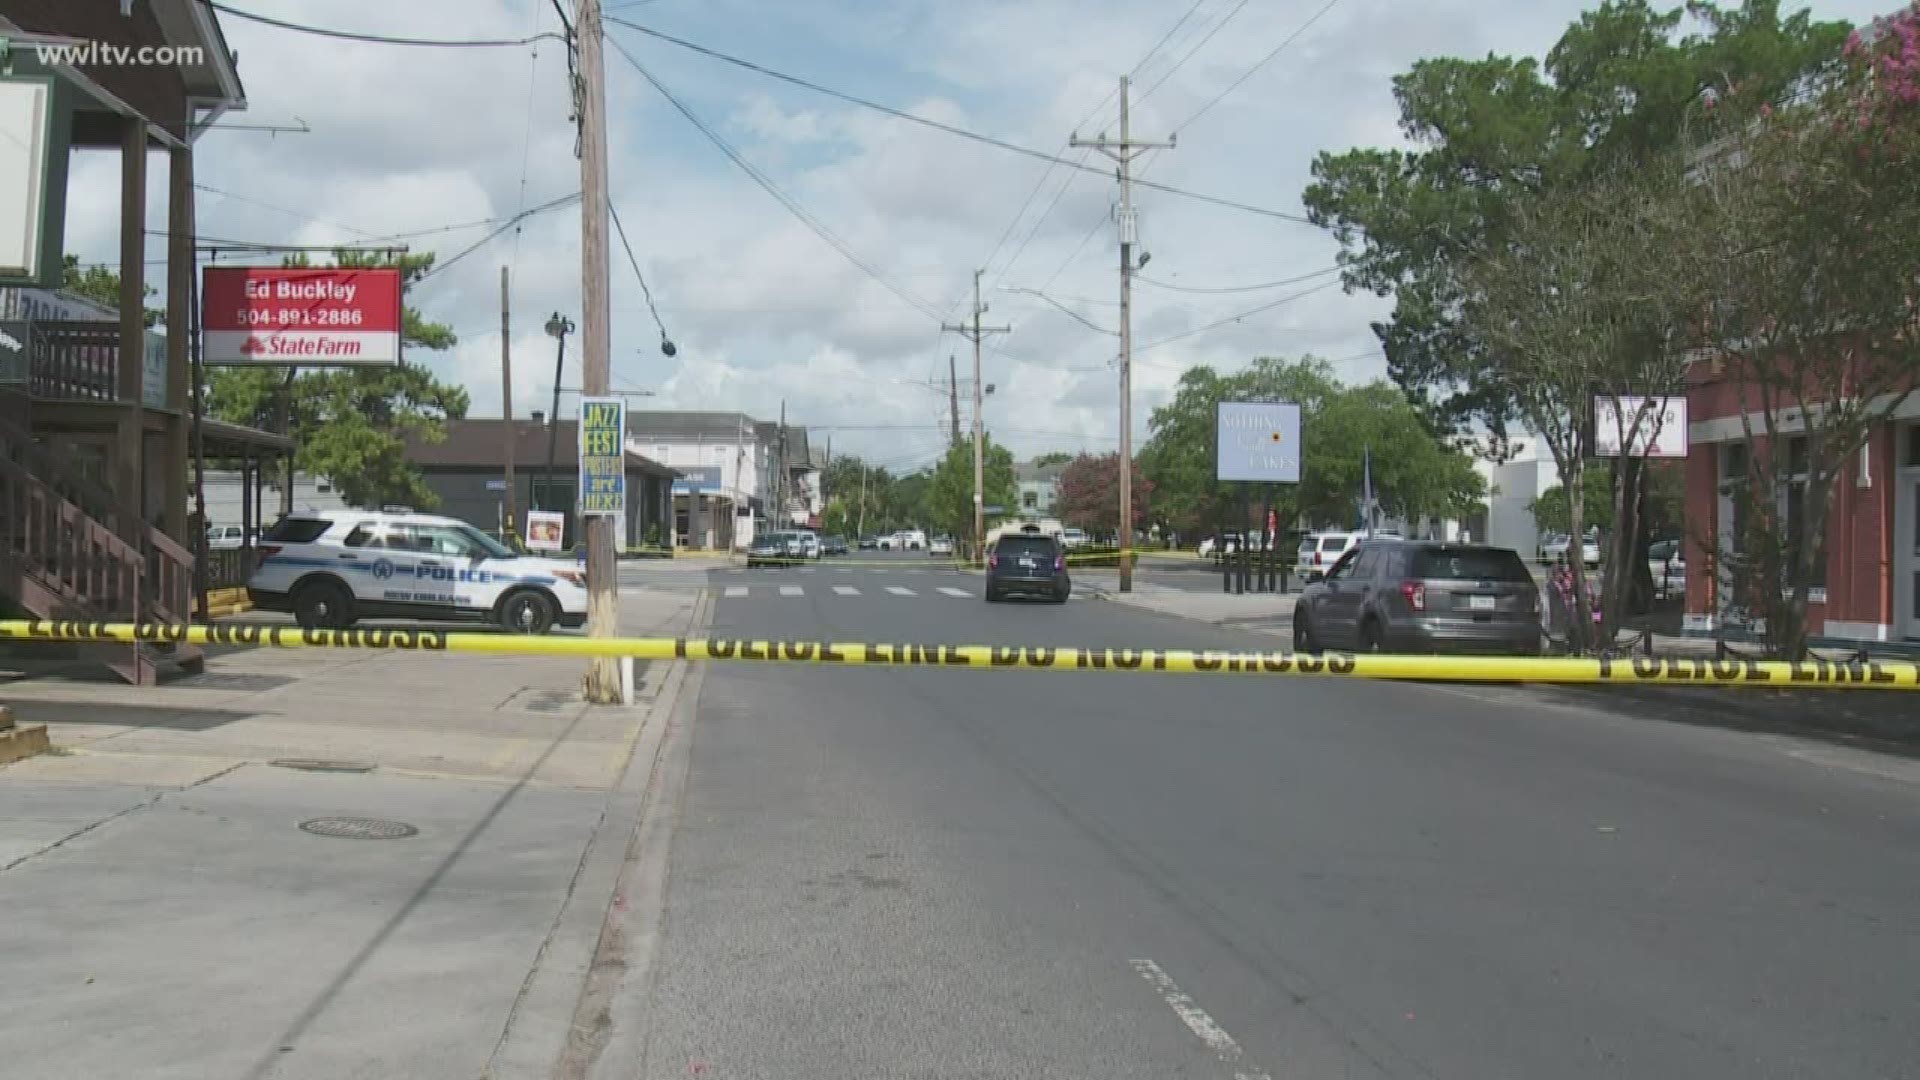 It was a tense scene in Uptown New Orleans Monday morning, as NOPD Second District Officers responded to an armed robbery in progress at a drug store near Prytania and Upperline Streets.